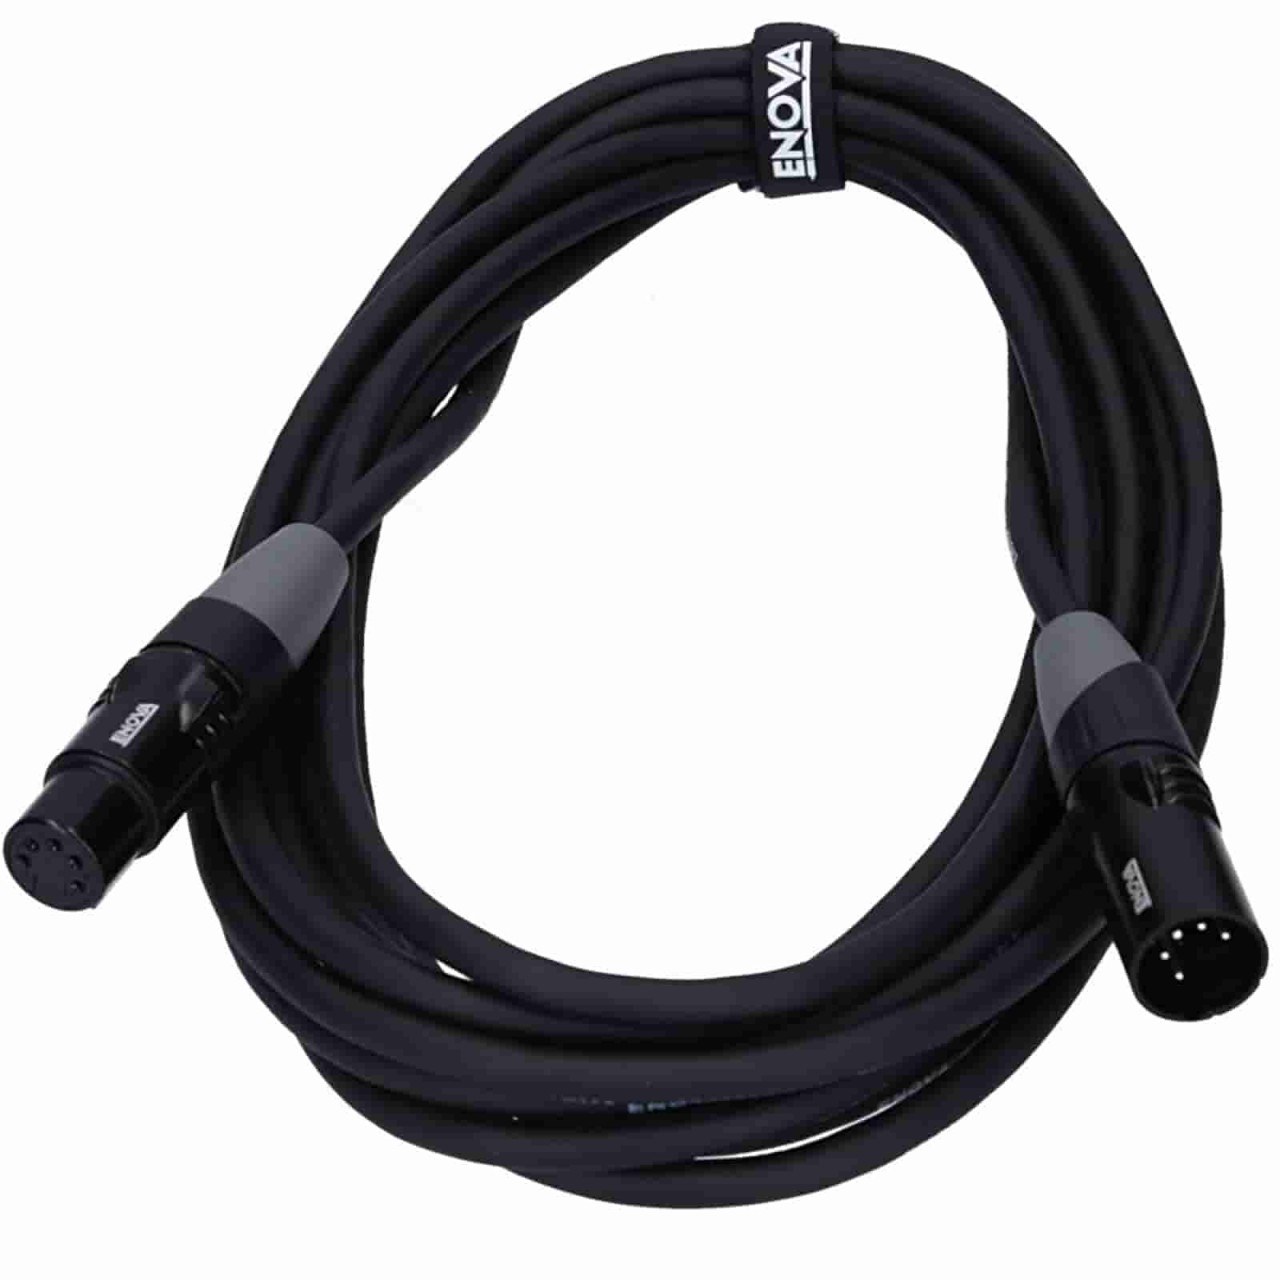 20m DMX cable with 5-pin XLR connector